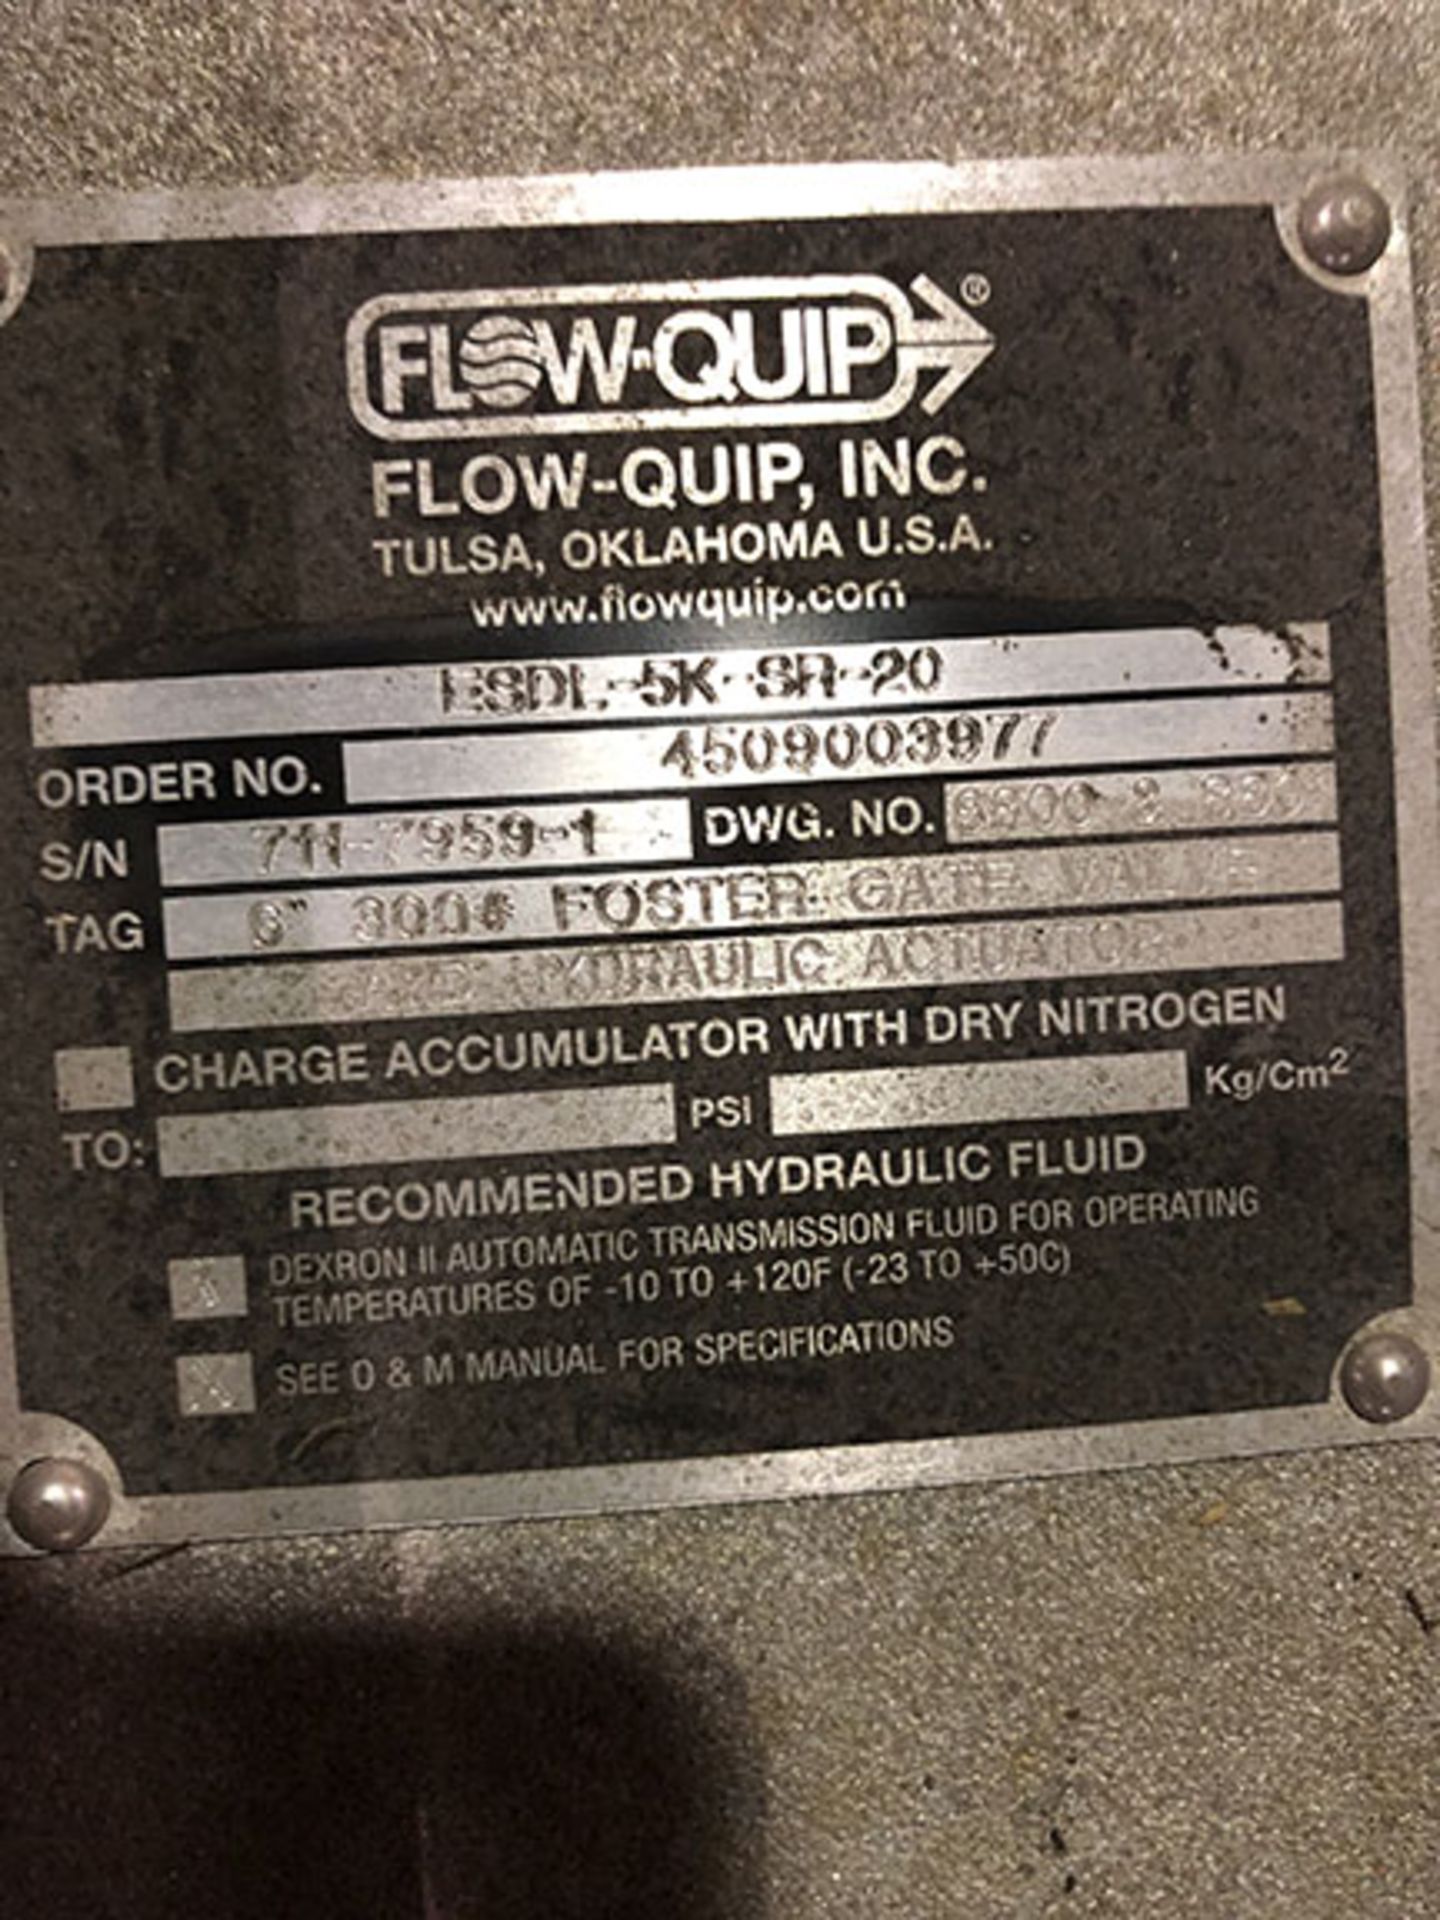 FLOW-QUIP ELECTRICAL BOX; S/N 711-795-91, MODEL 8DL-5K-82-20 - Image 2 of 2